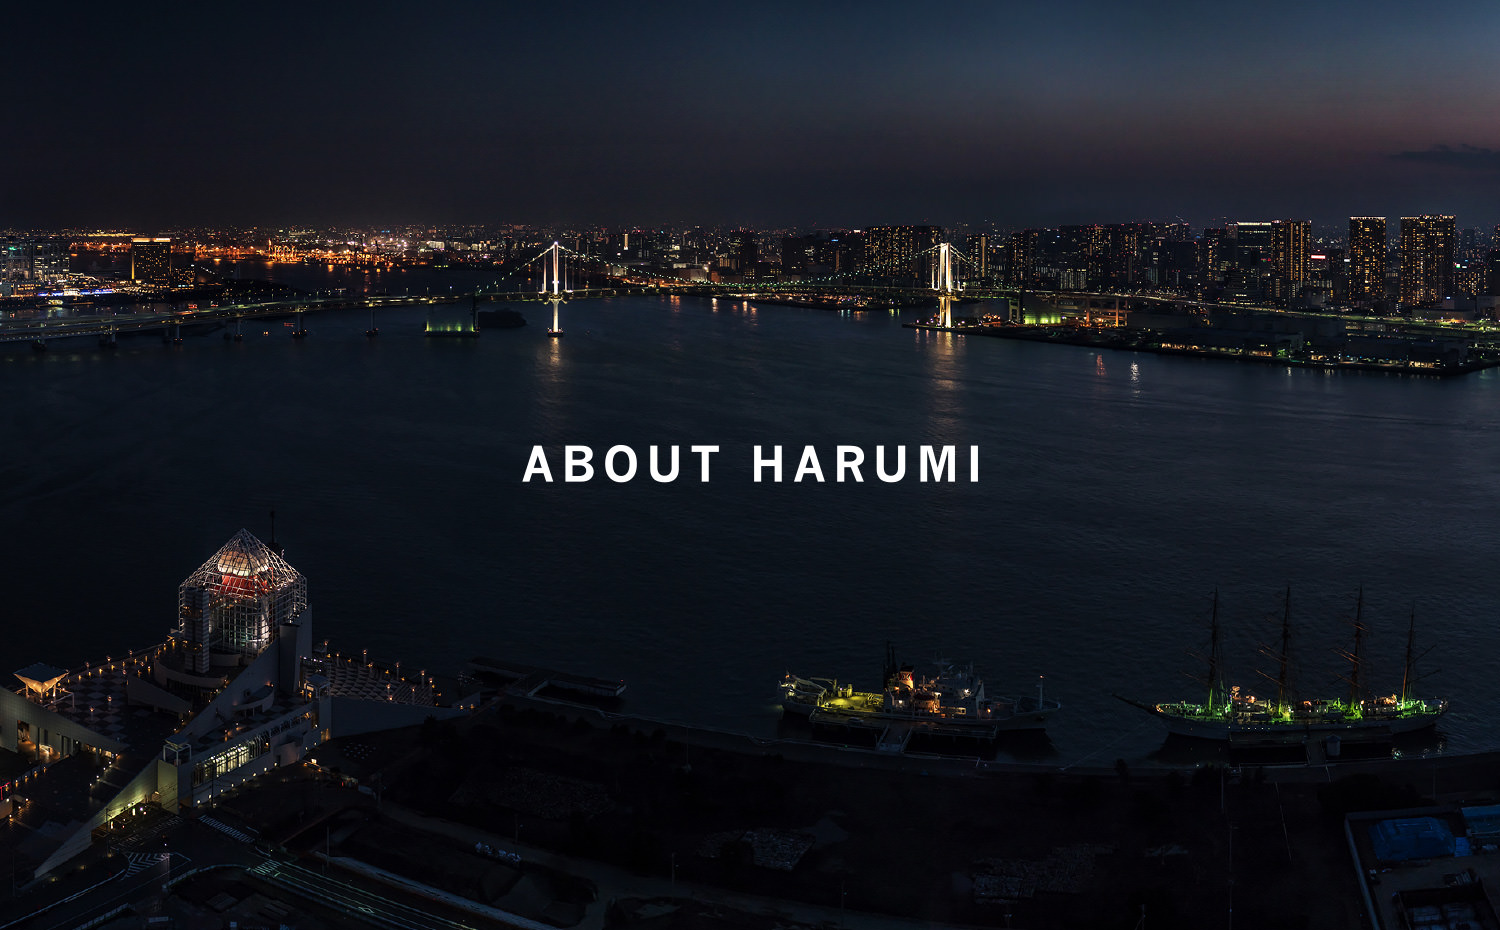 ABOUT HARUMI